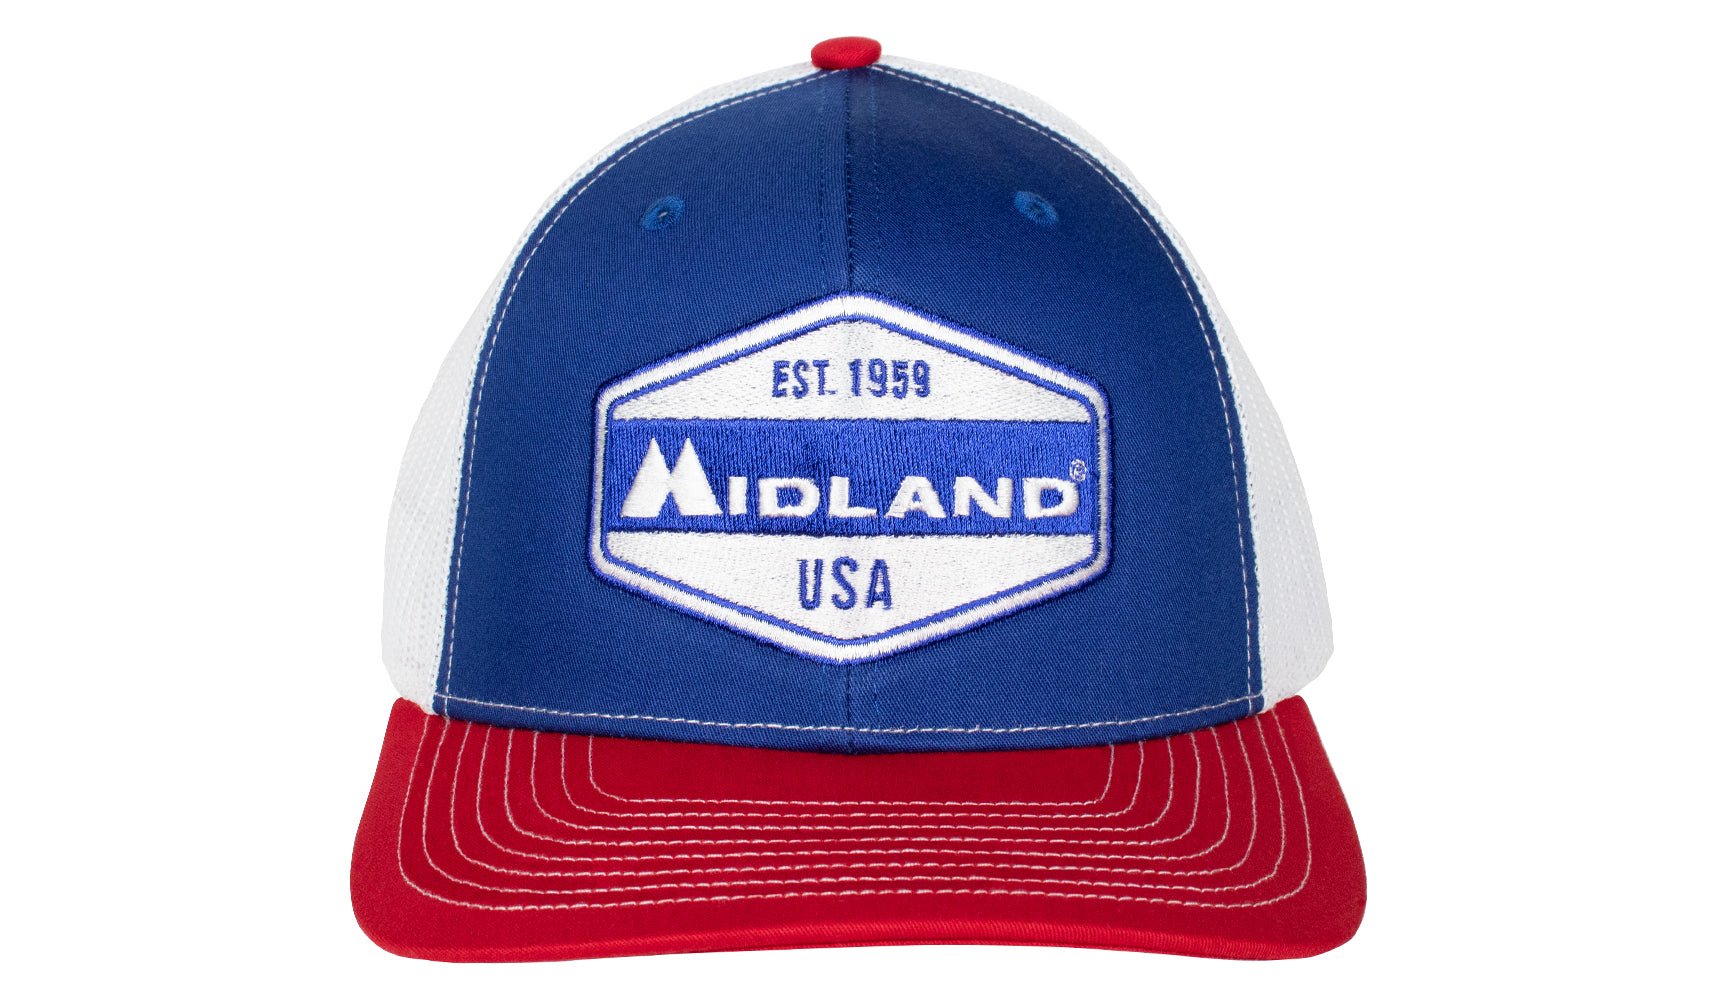 Midland Est. "1959" Crest Hat - Red, White, and Blue